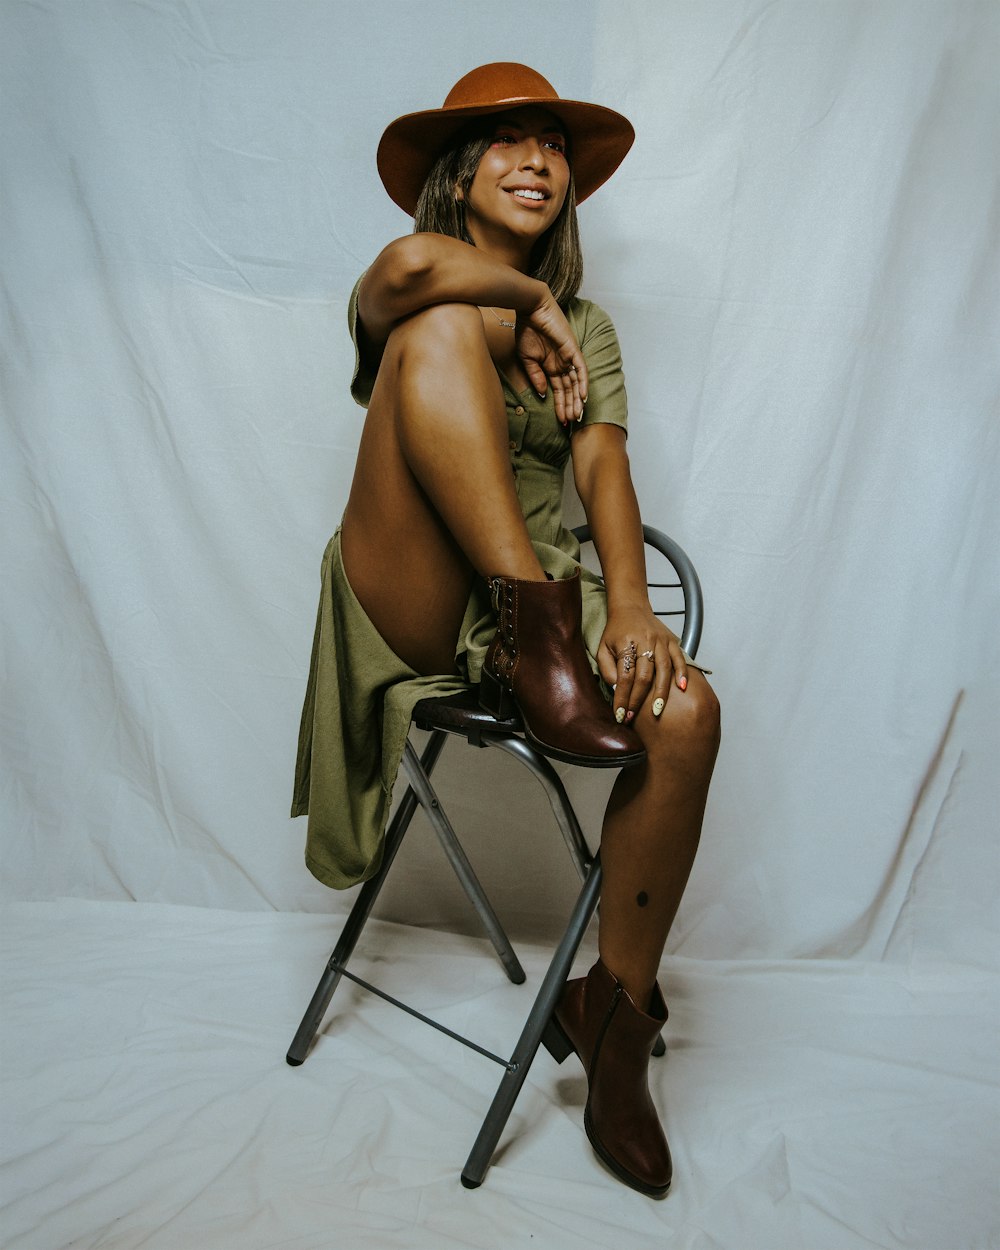 a woman sitting on a chair wearing a hat